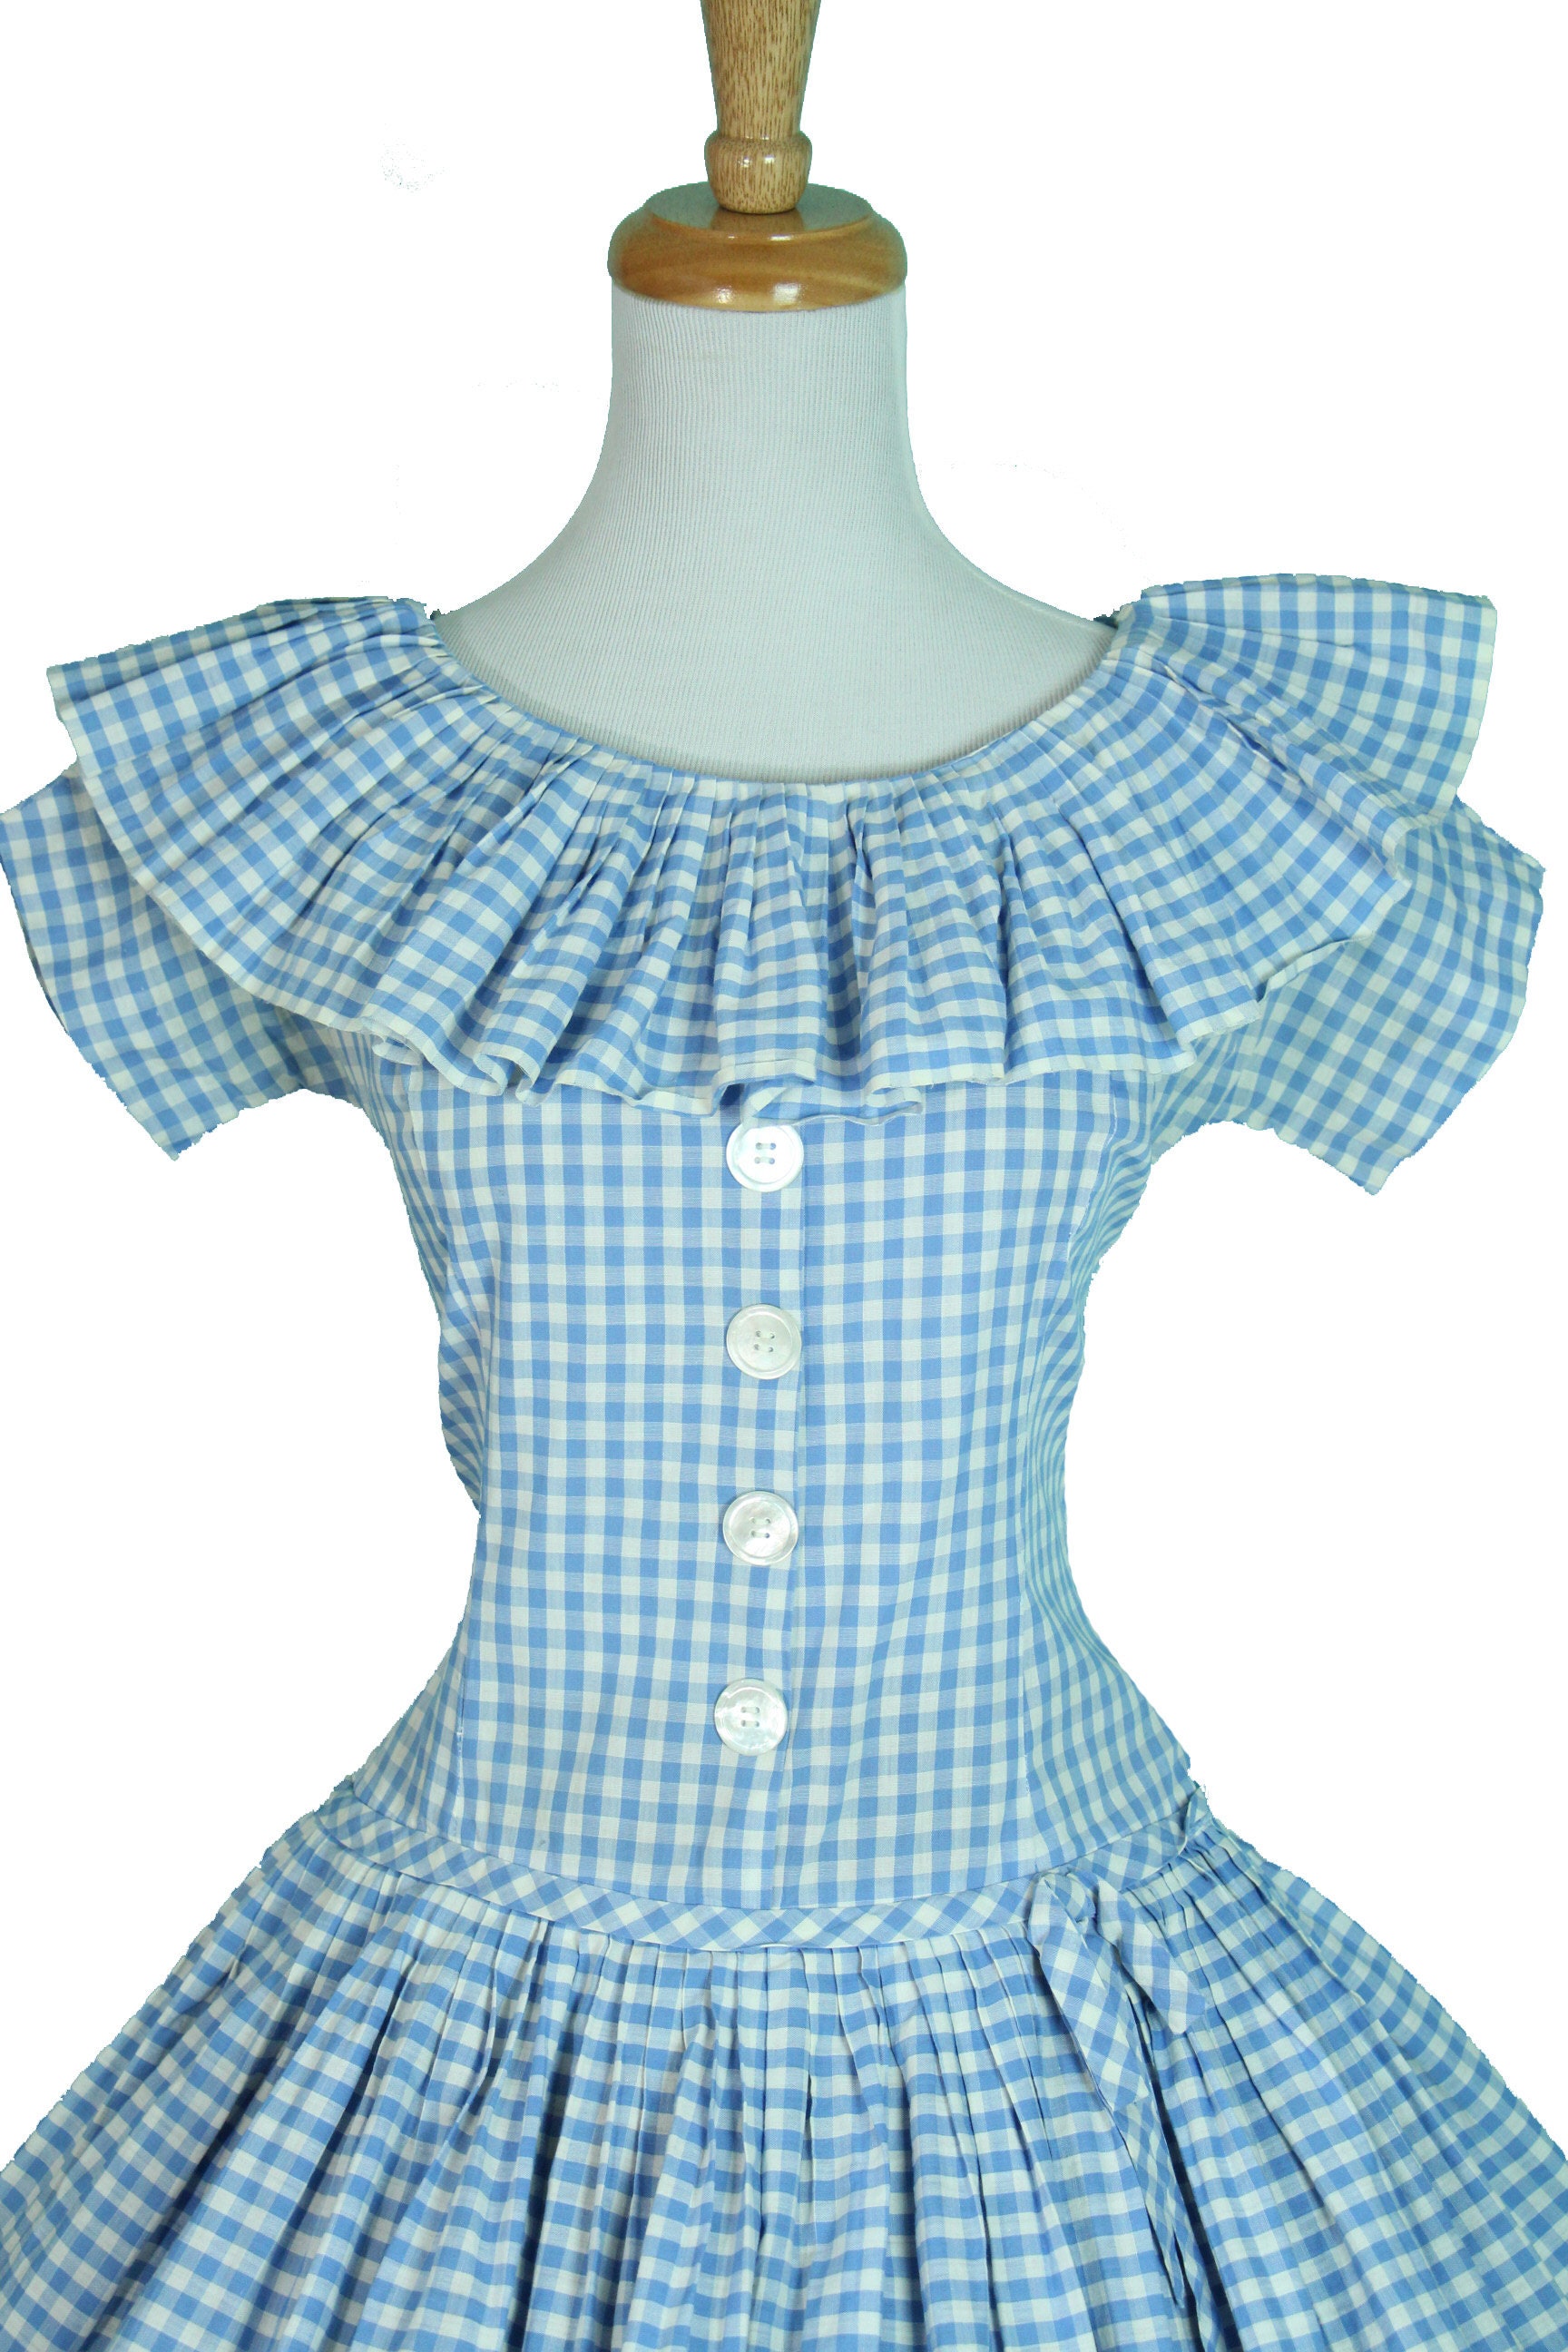 CUTE 1950s Vintage Summer Dress Checkered Baby Blue Cotton - Etsy